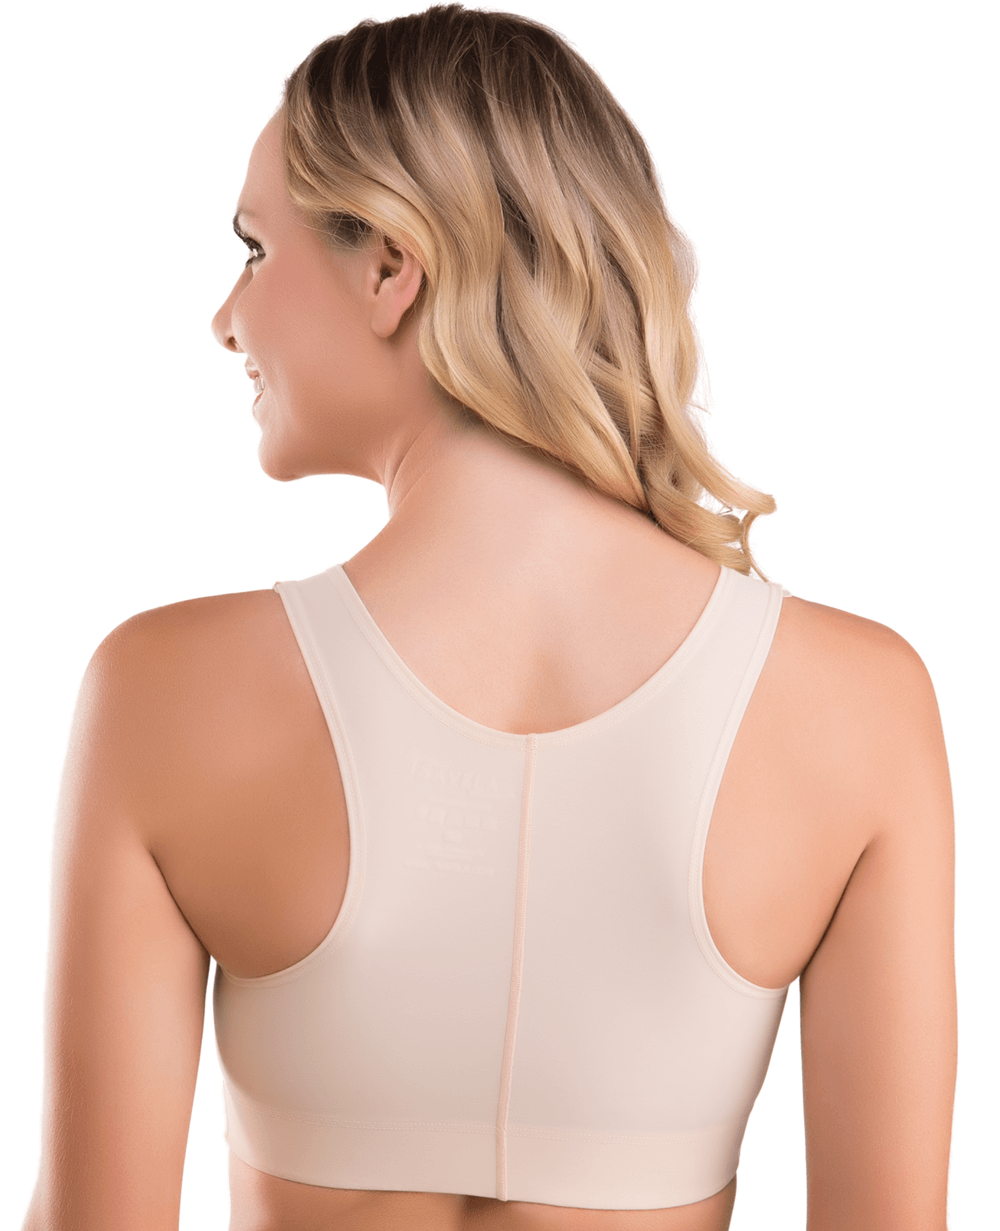 Breast Surgery Support Bra with Built-In Stabilizer Band (BR10)